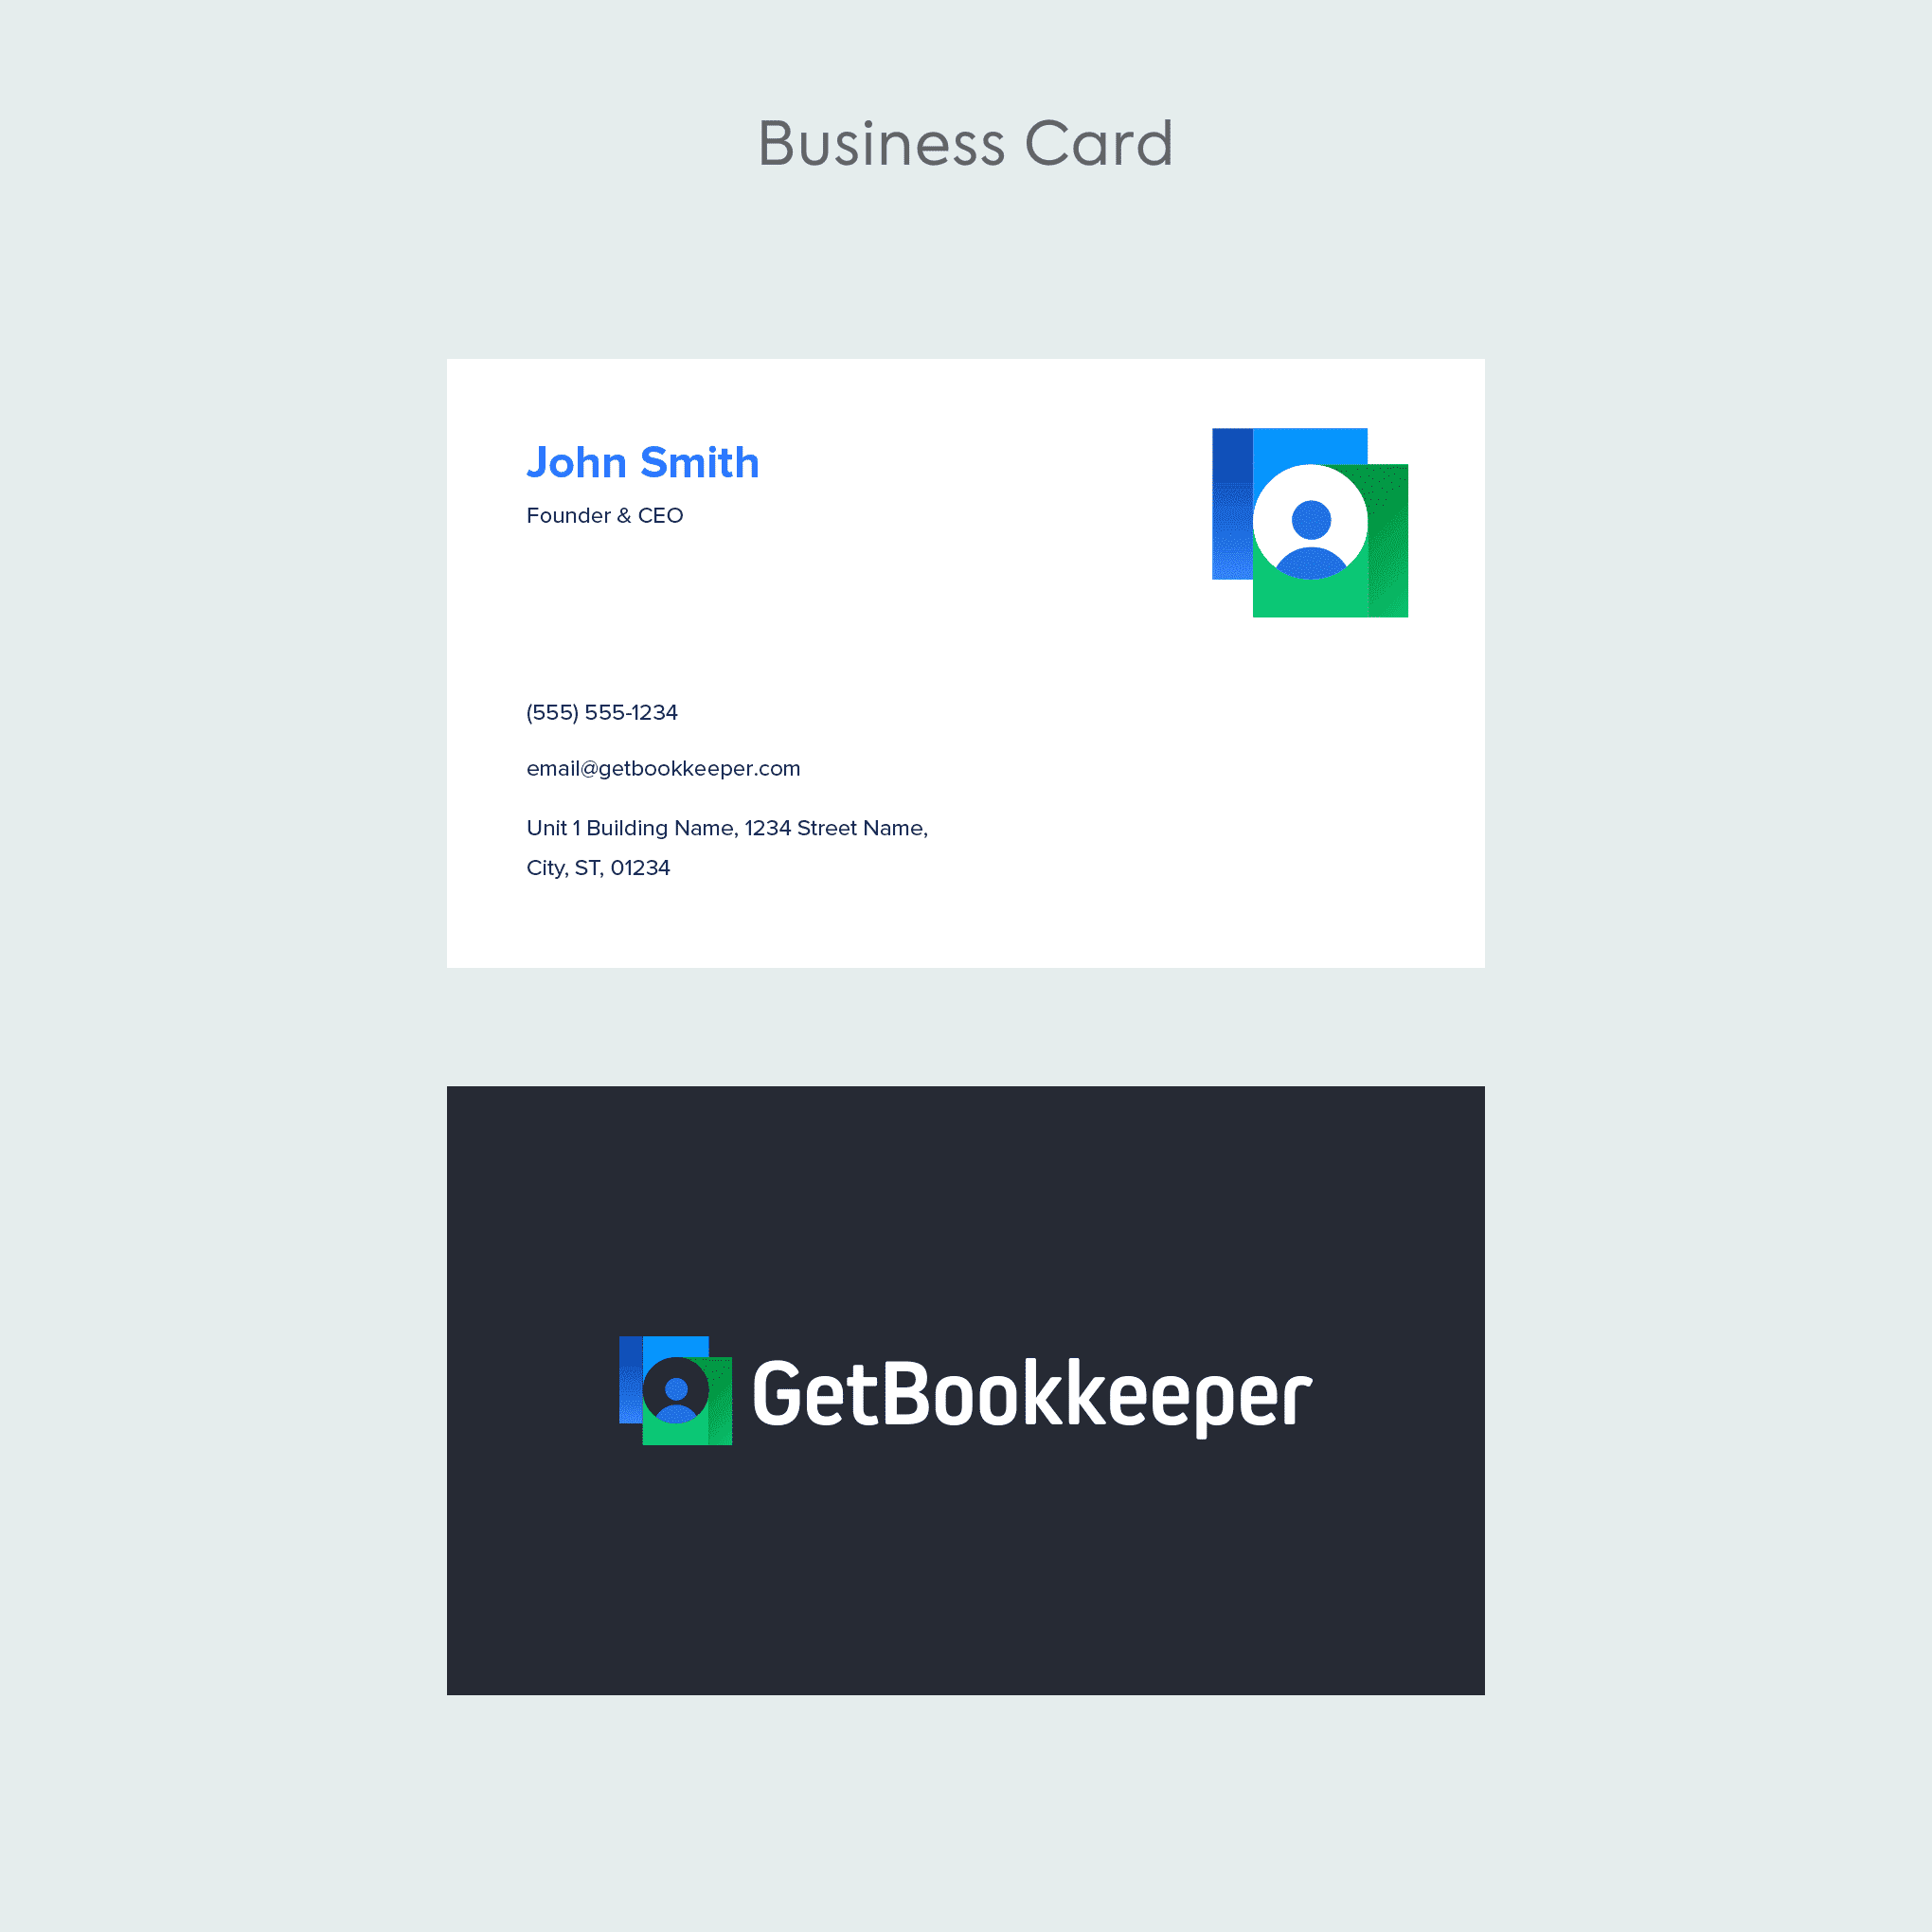 04 - Business Card Template (5)